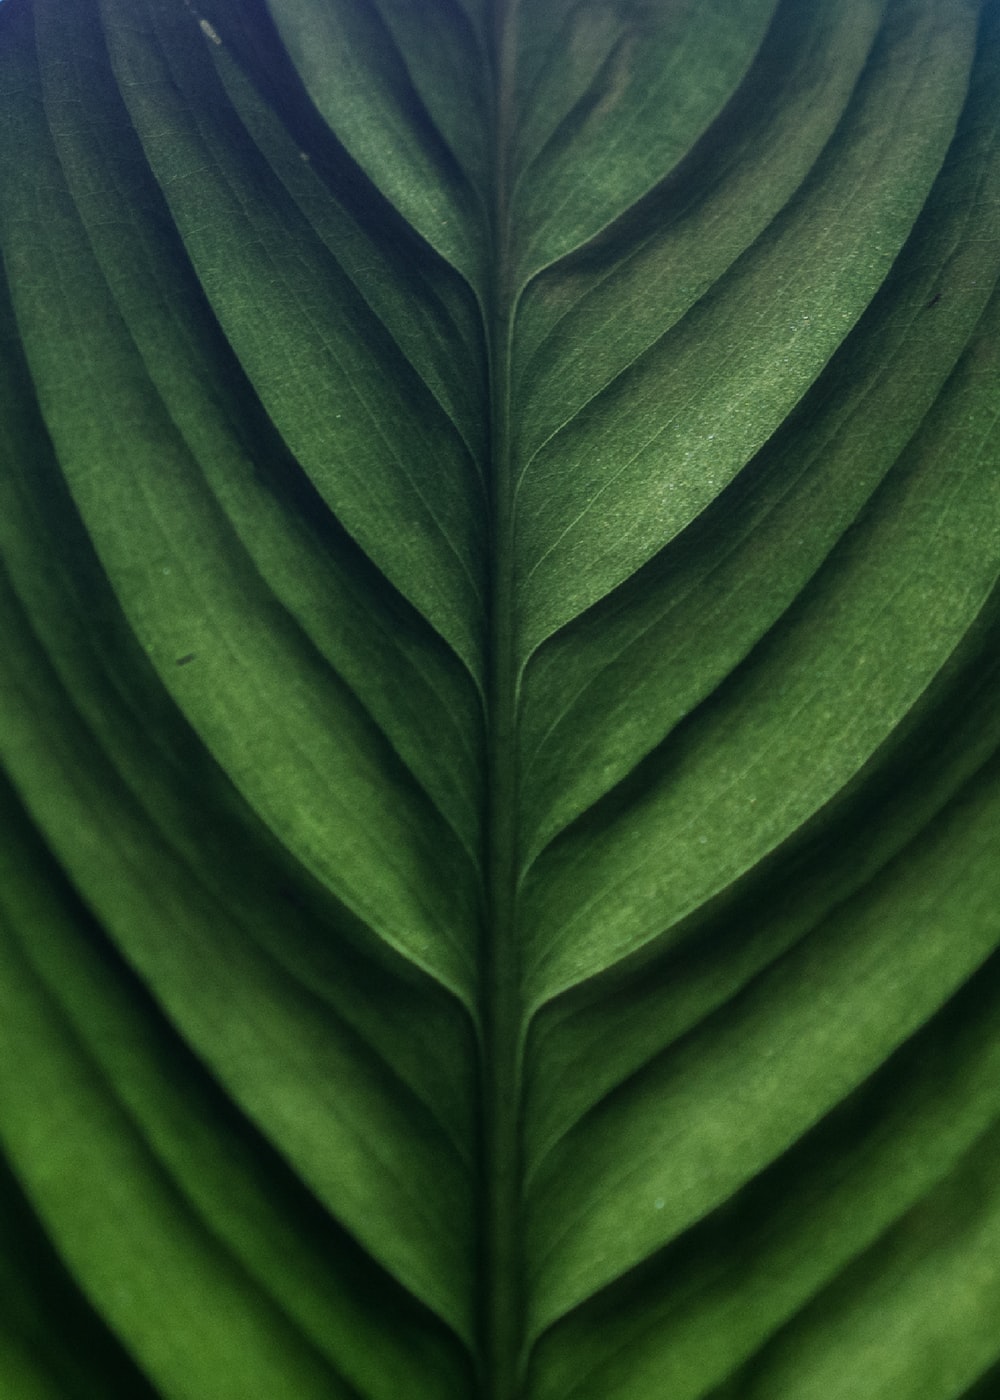 Plant Texture Picture. Download Free Image